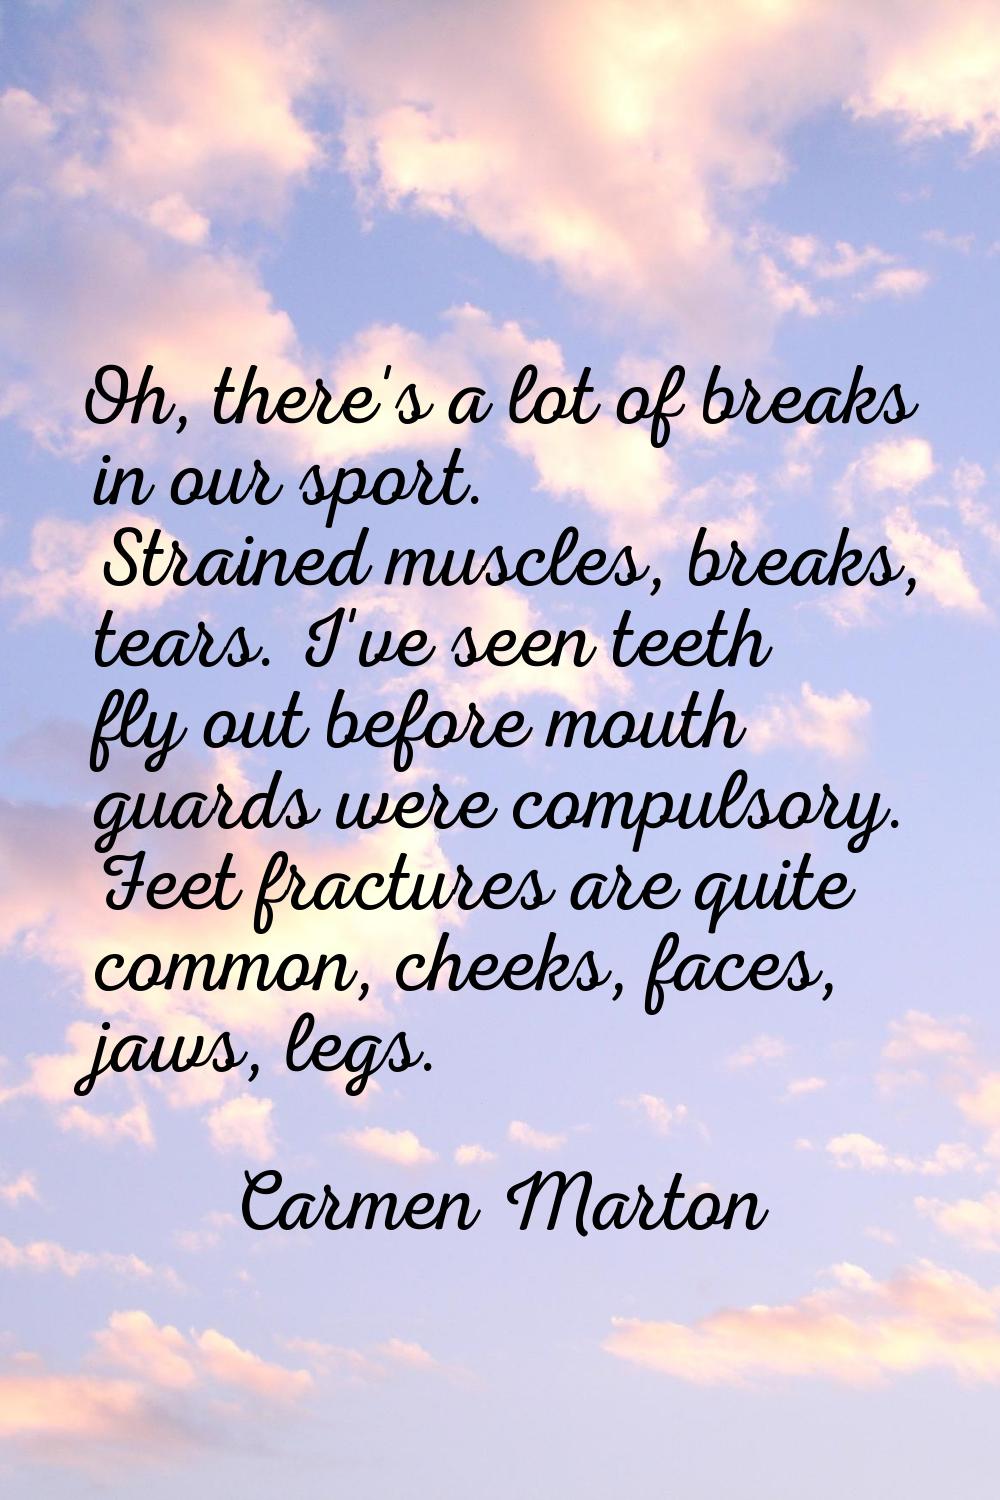 Oh, there's a lot of breaks in our sport. Strained muscles, breaks, tears. I've seen teeth fly out 